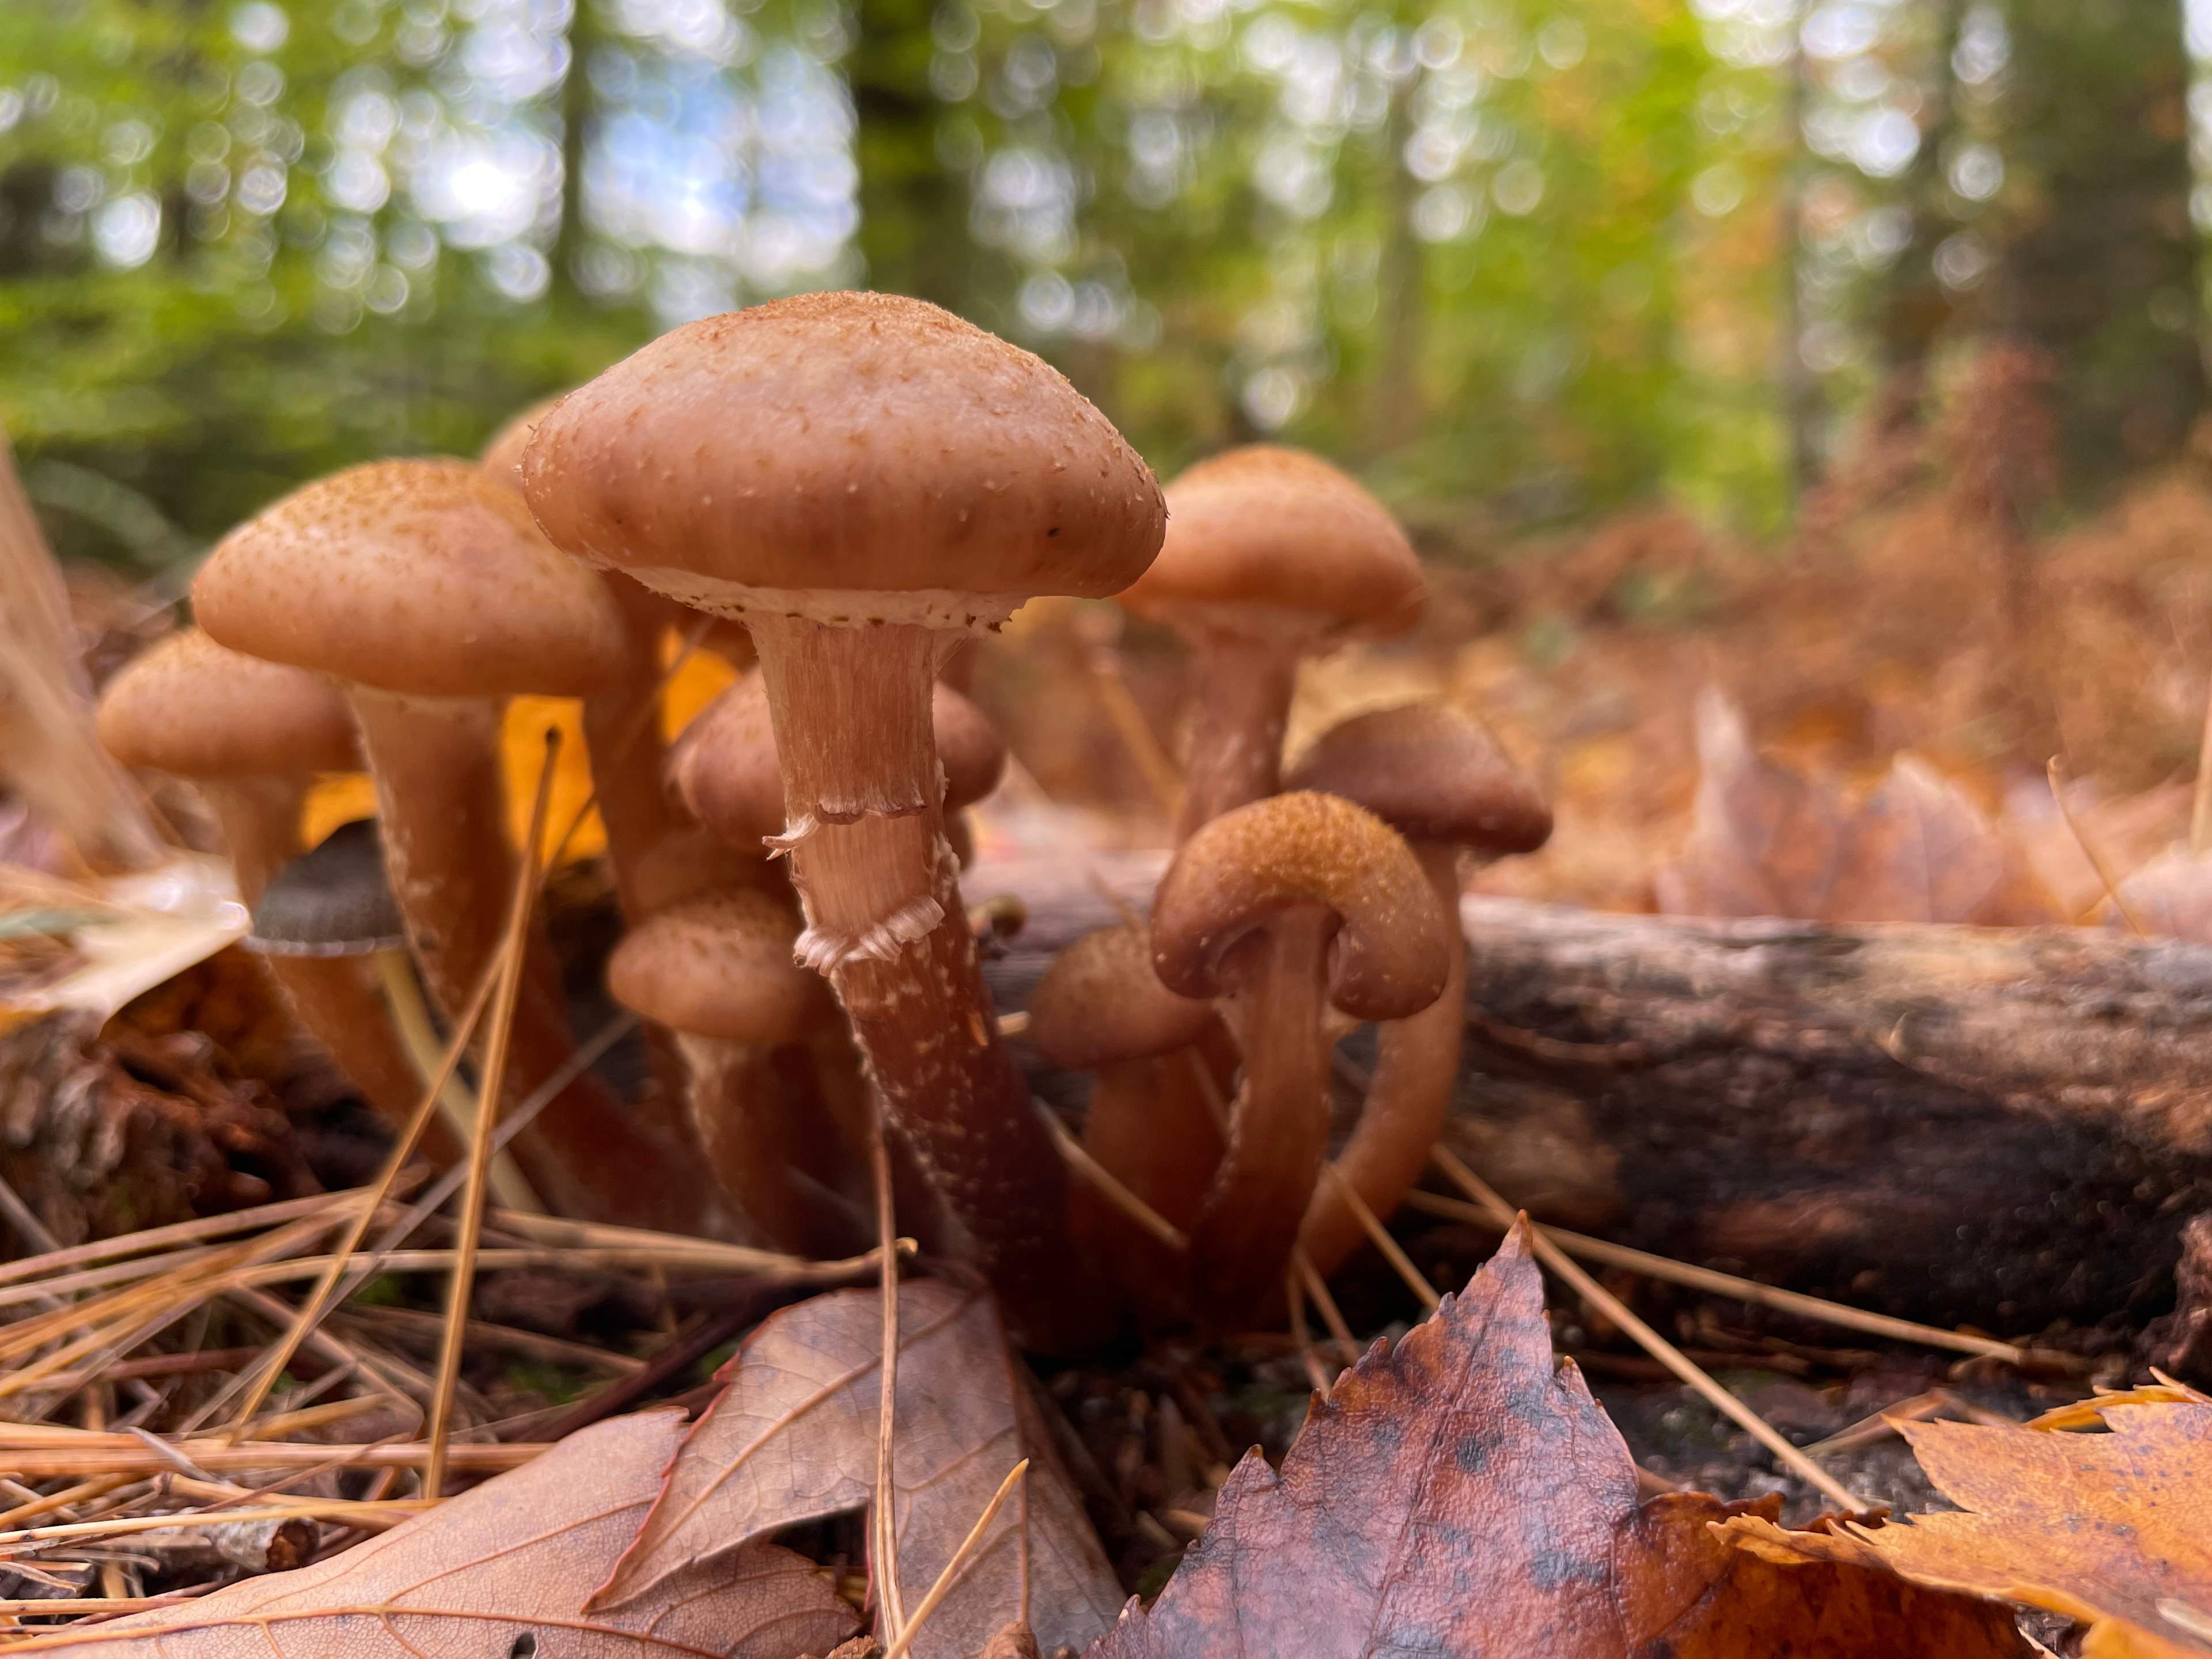 Cute lil’ mushies popping up from the forest floor in New Hampshire, October 2021. 📸  by Kristen